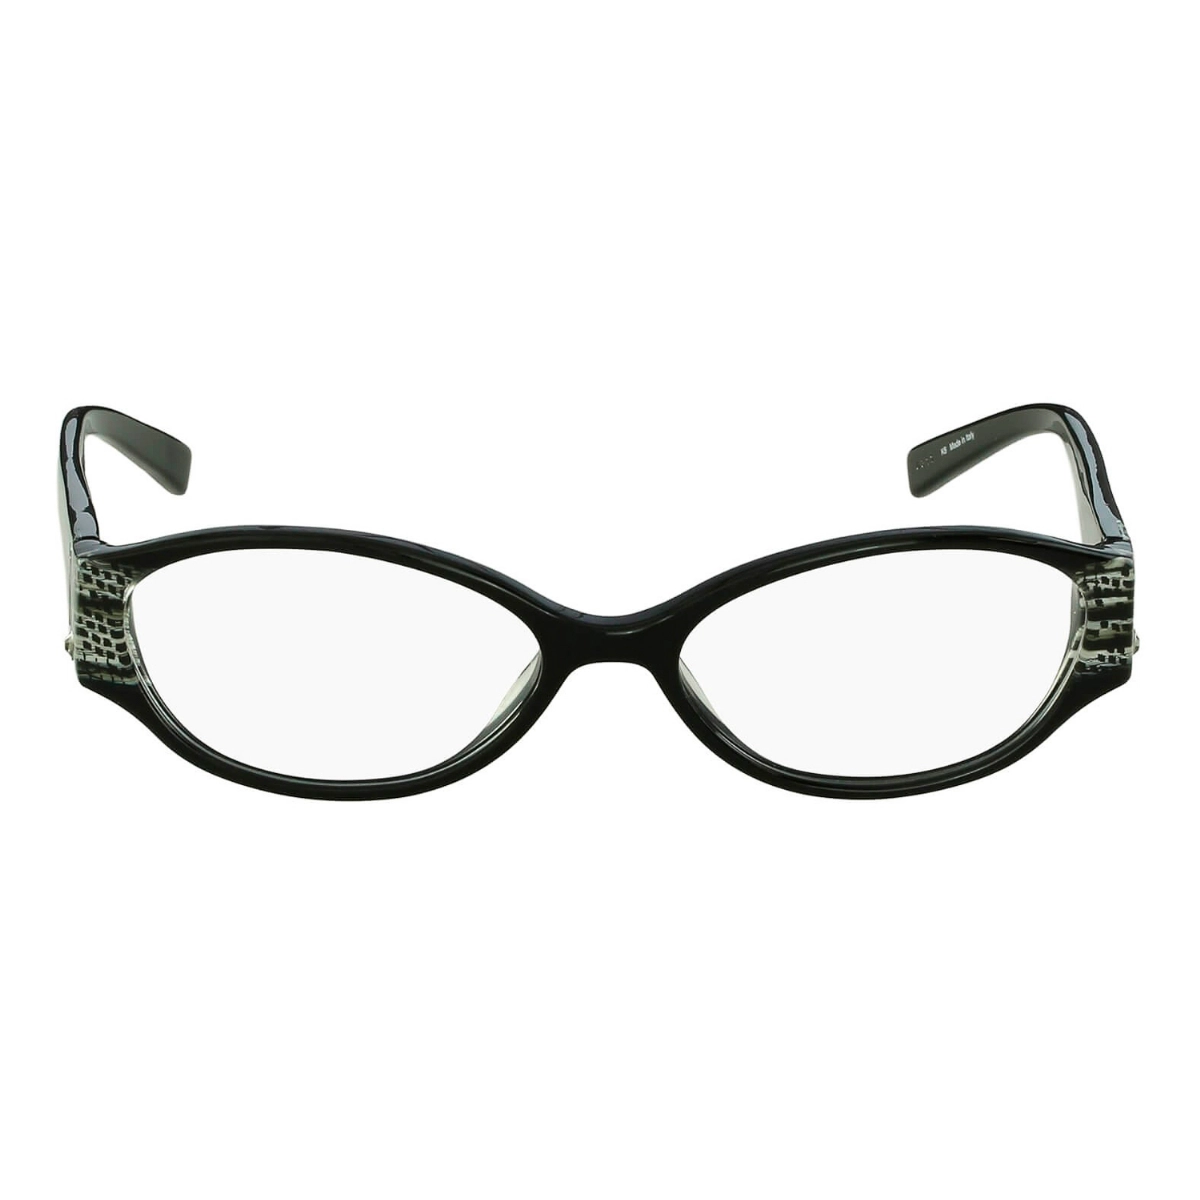 LUNETTES FEMMES GUESS MARCIANO GM130-52-BLK